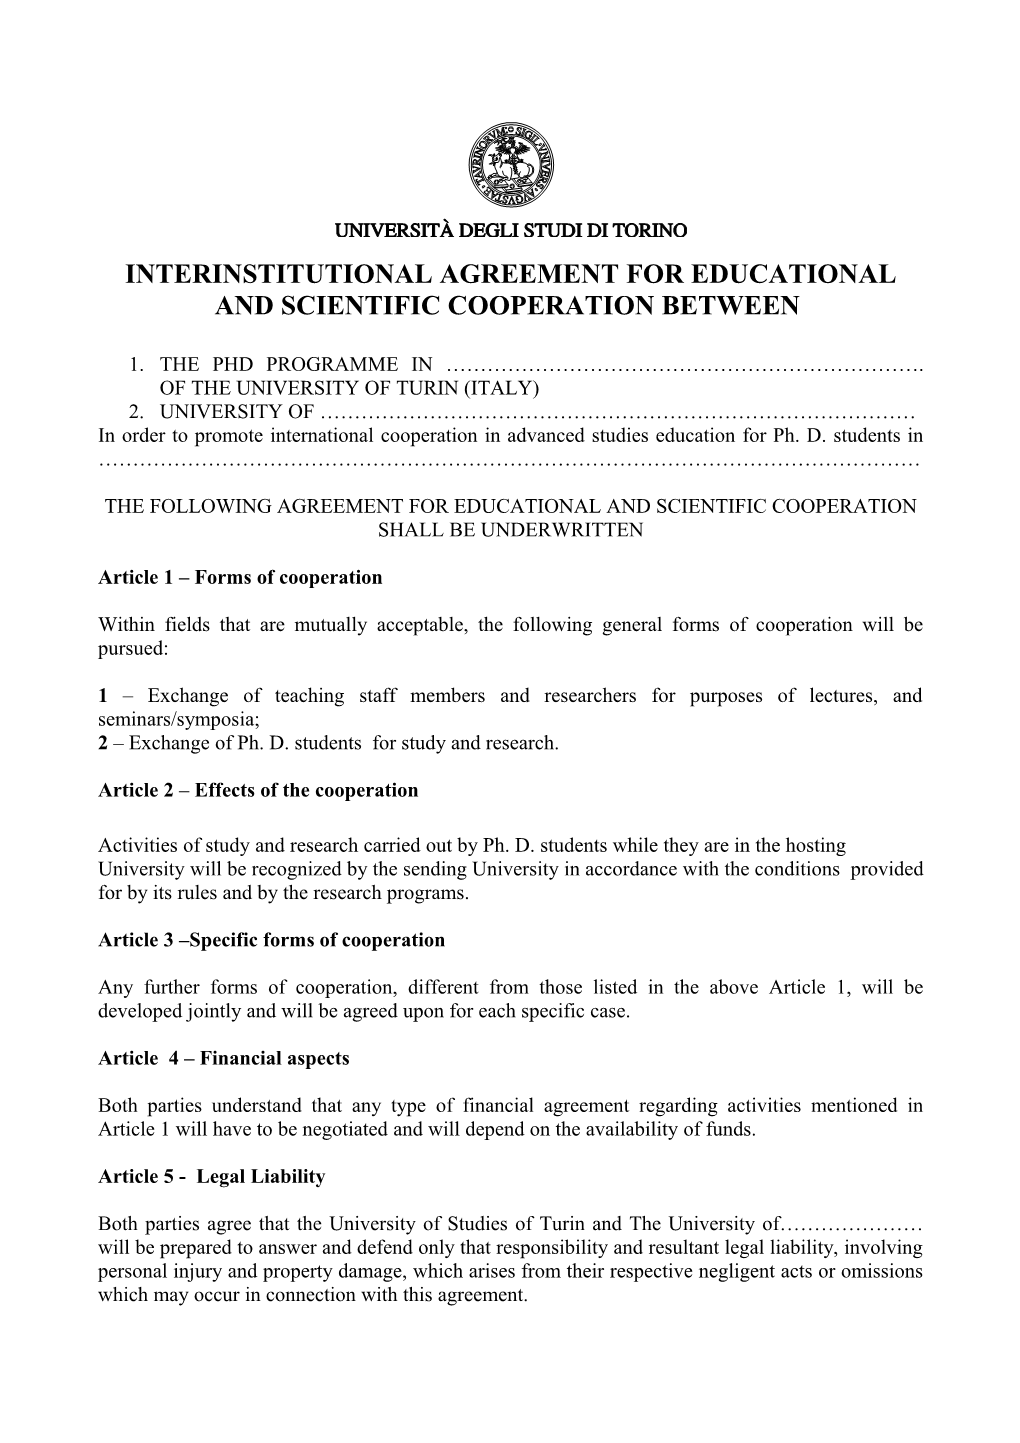 Interinstitutional Agreement for Educational and Scientific Cooperation Between